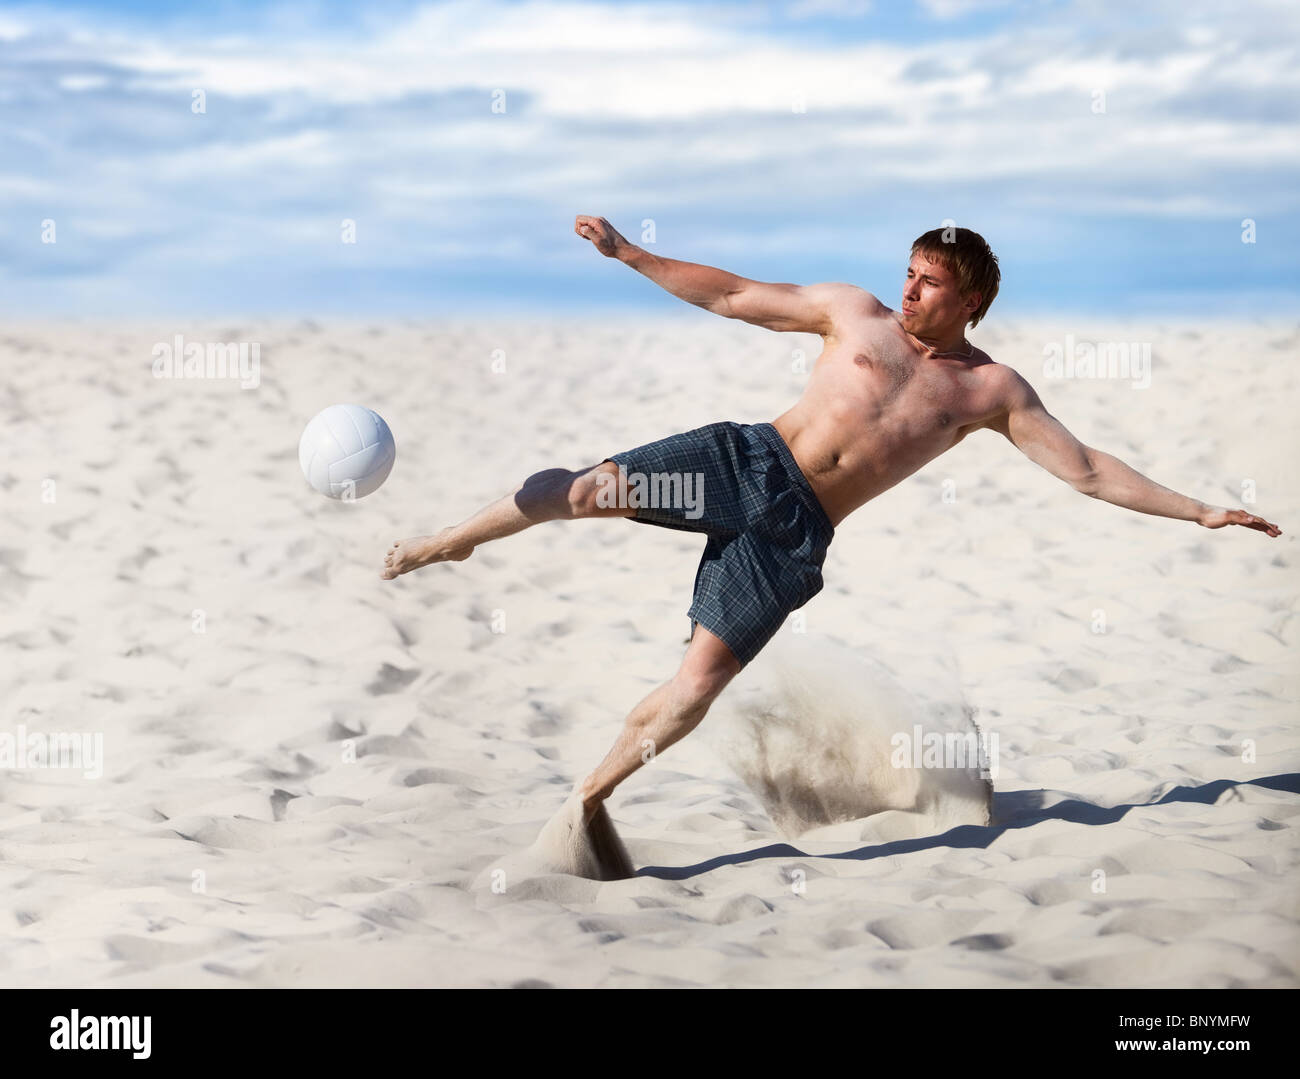 Young man playing soccer on beach. Stock Photo